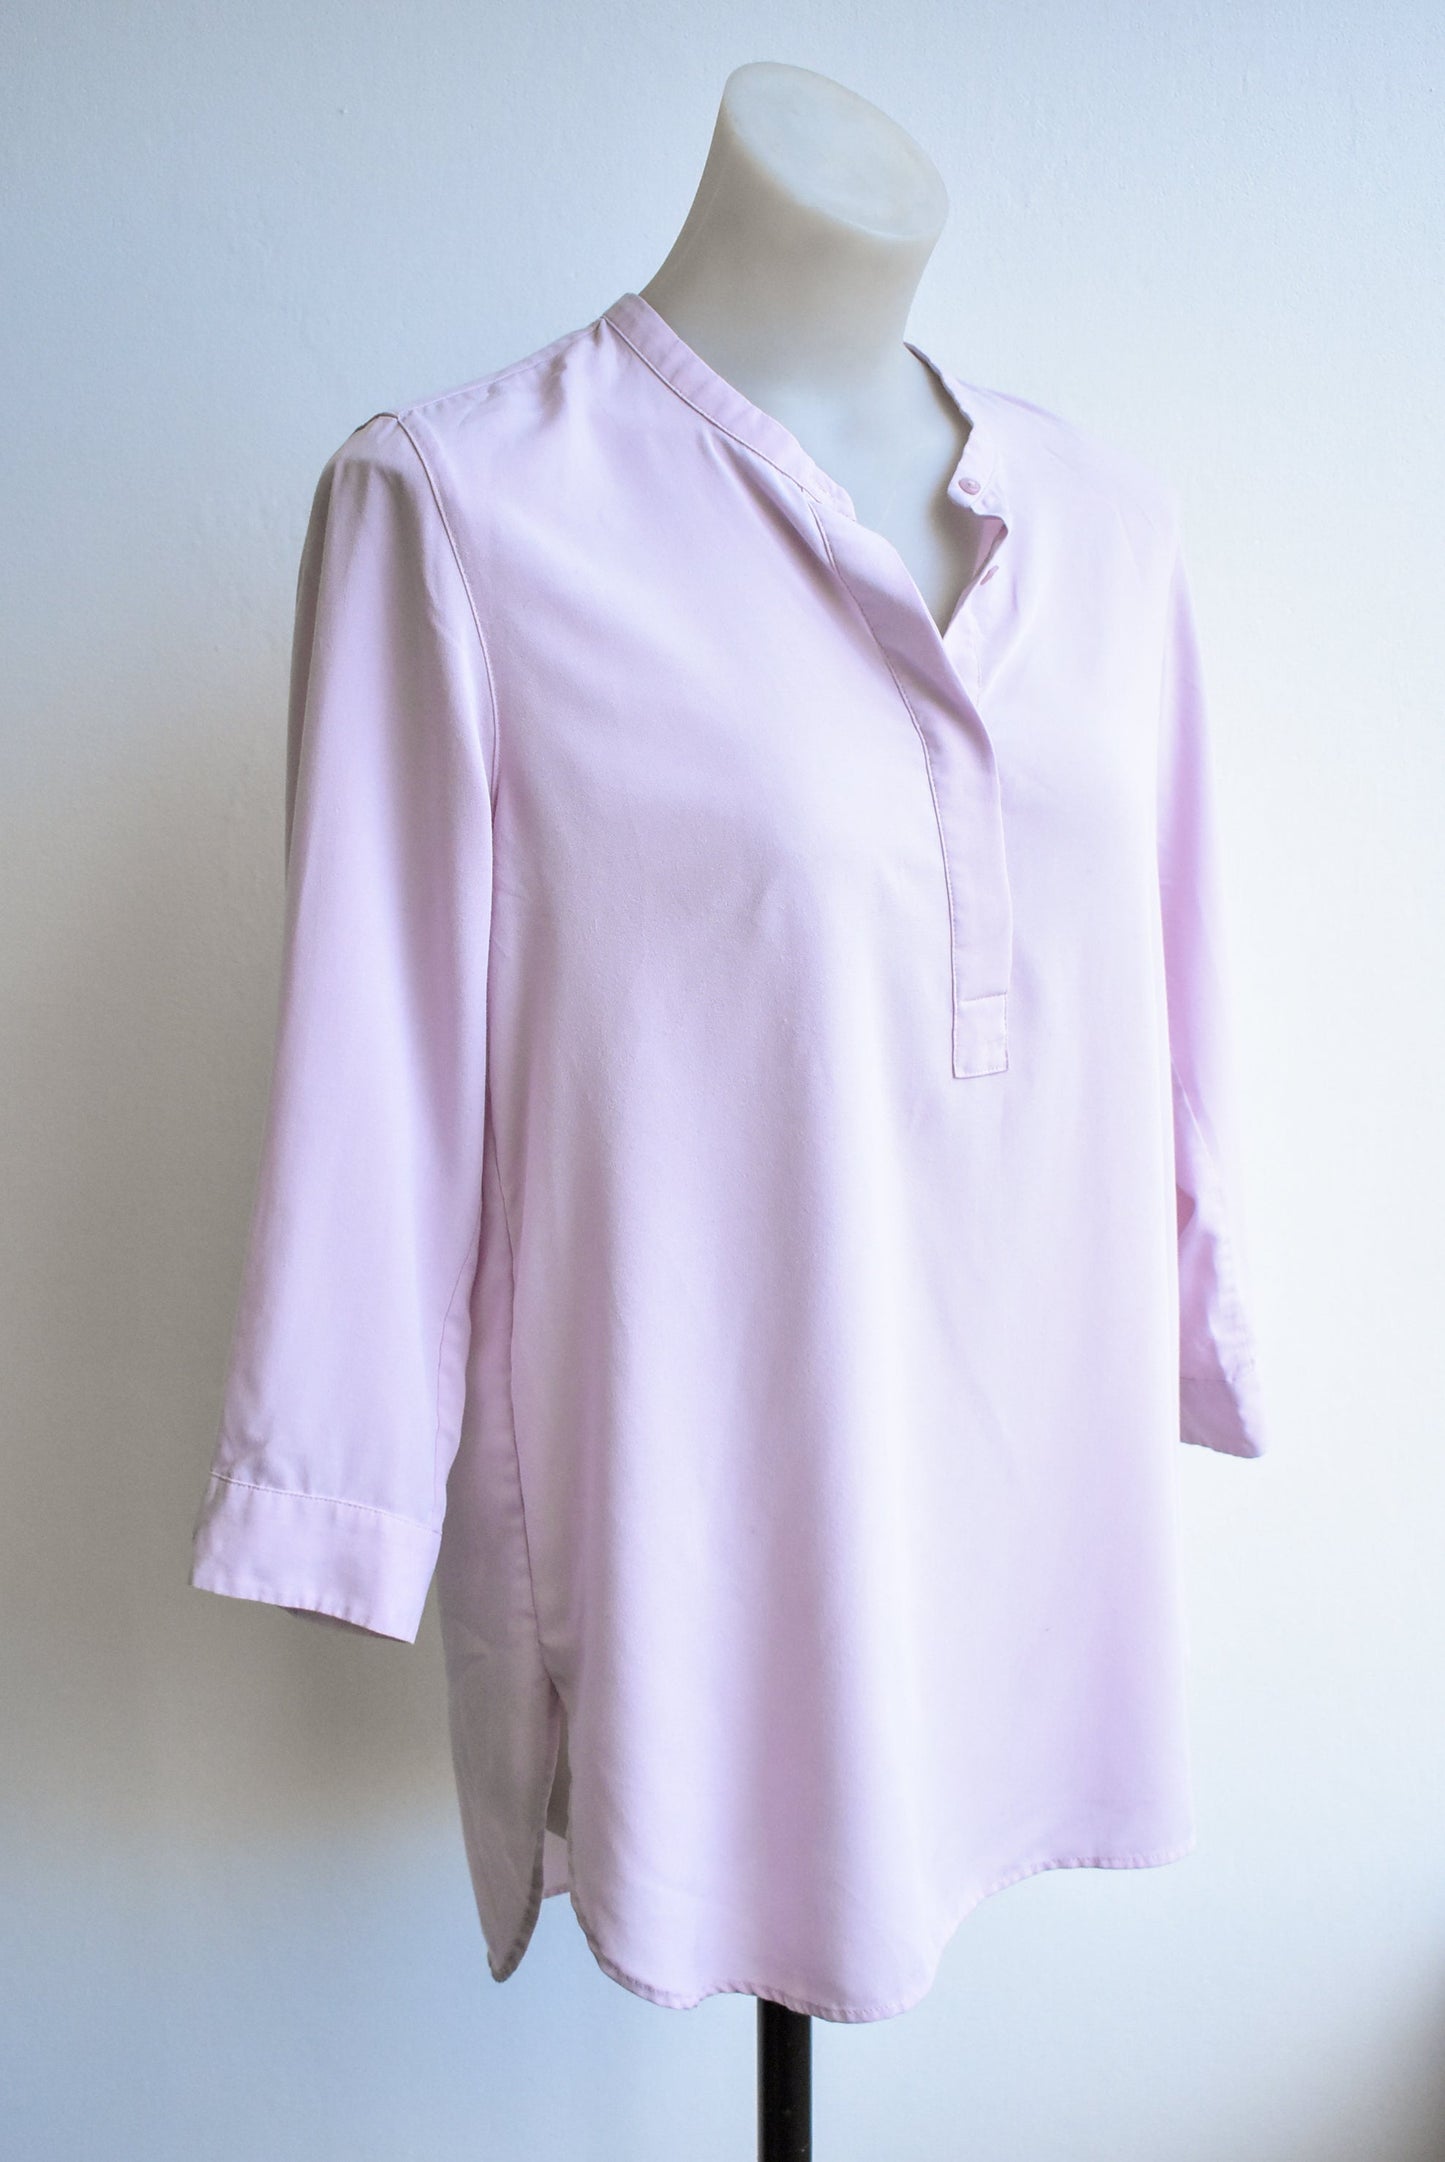 Uniqlo baby pink blouse, S